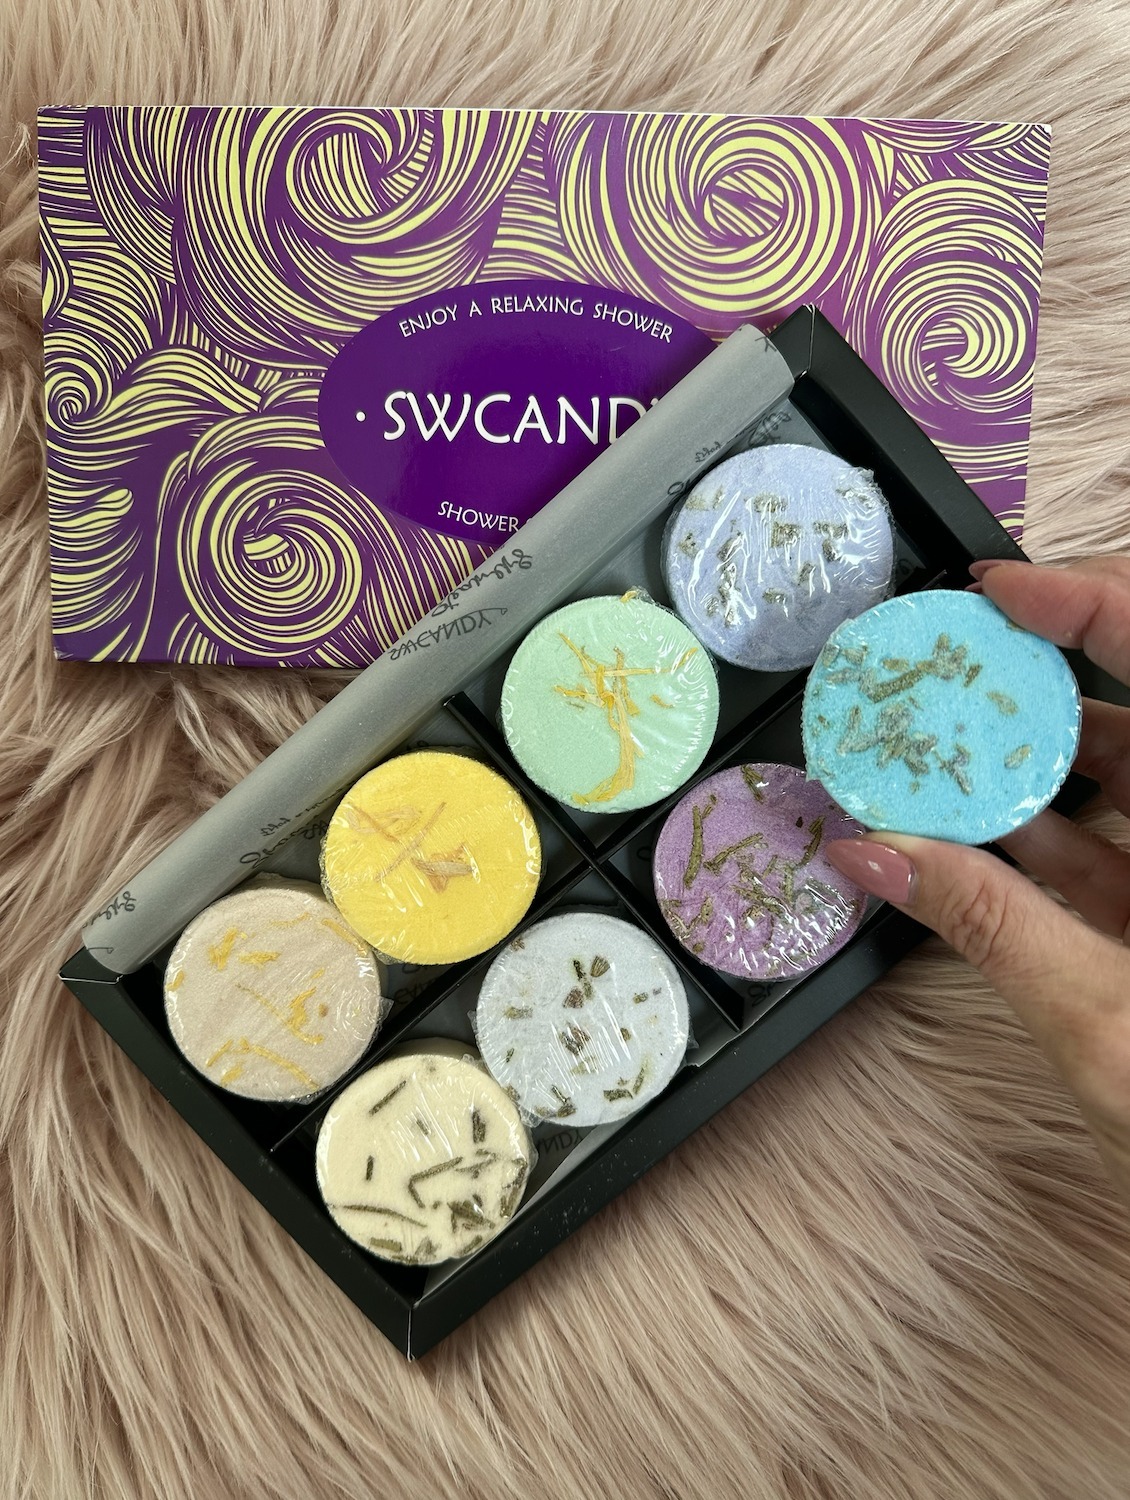 SWCANDY Aromatherapy Shower Steamers 8 pcs Bath Bombs Shower Bombs with Essential Oils Relaxation Home SPA